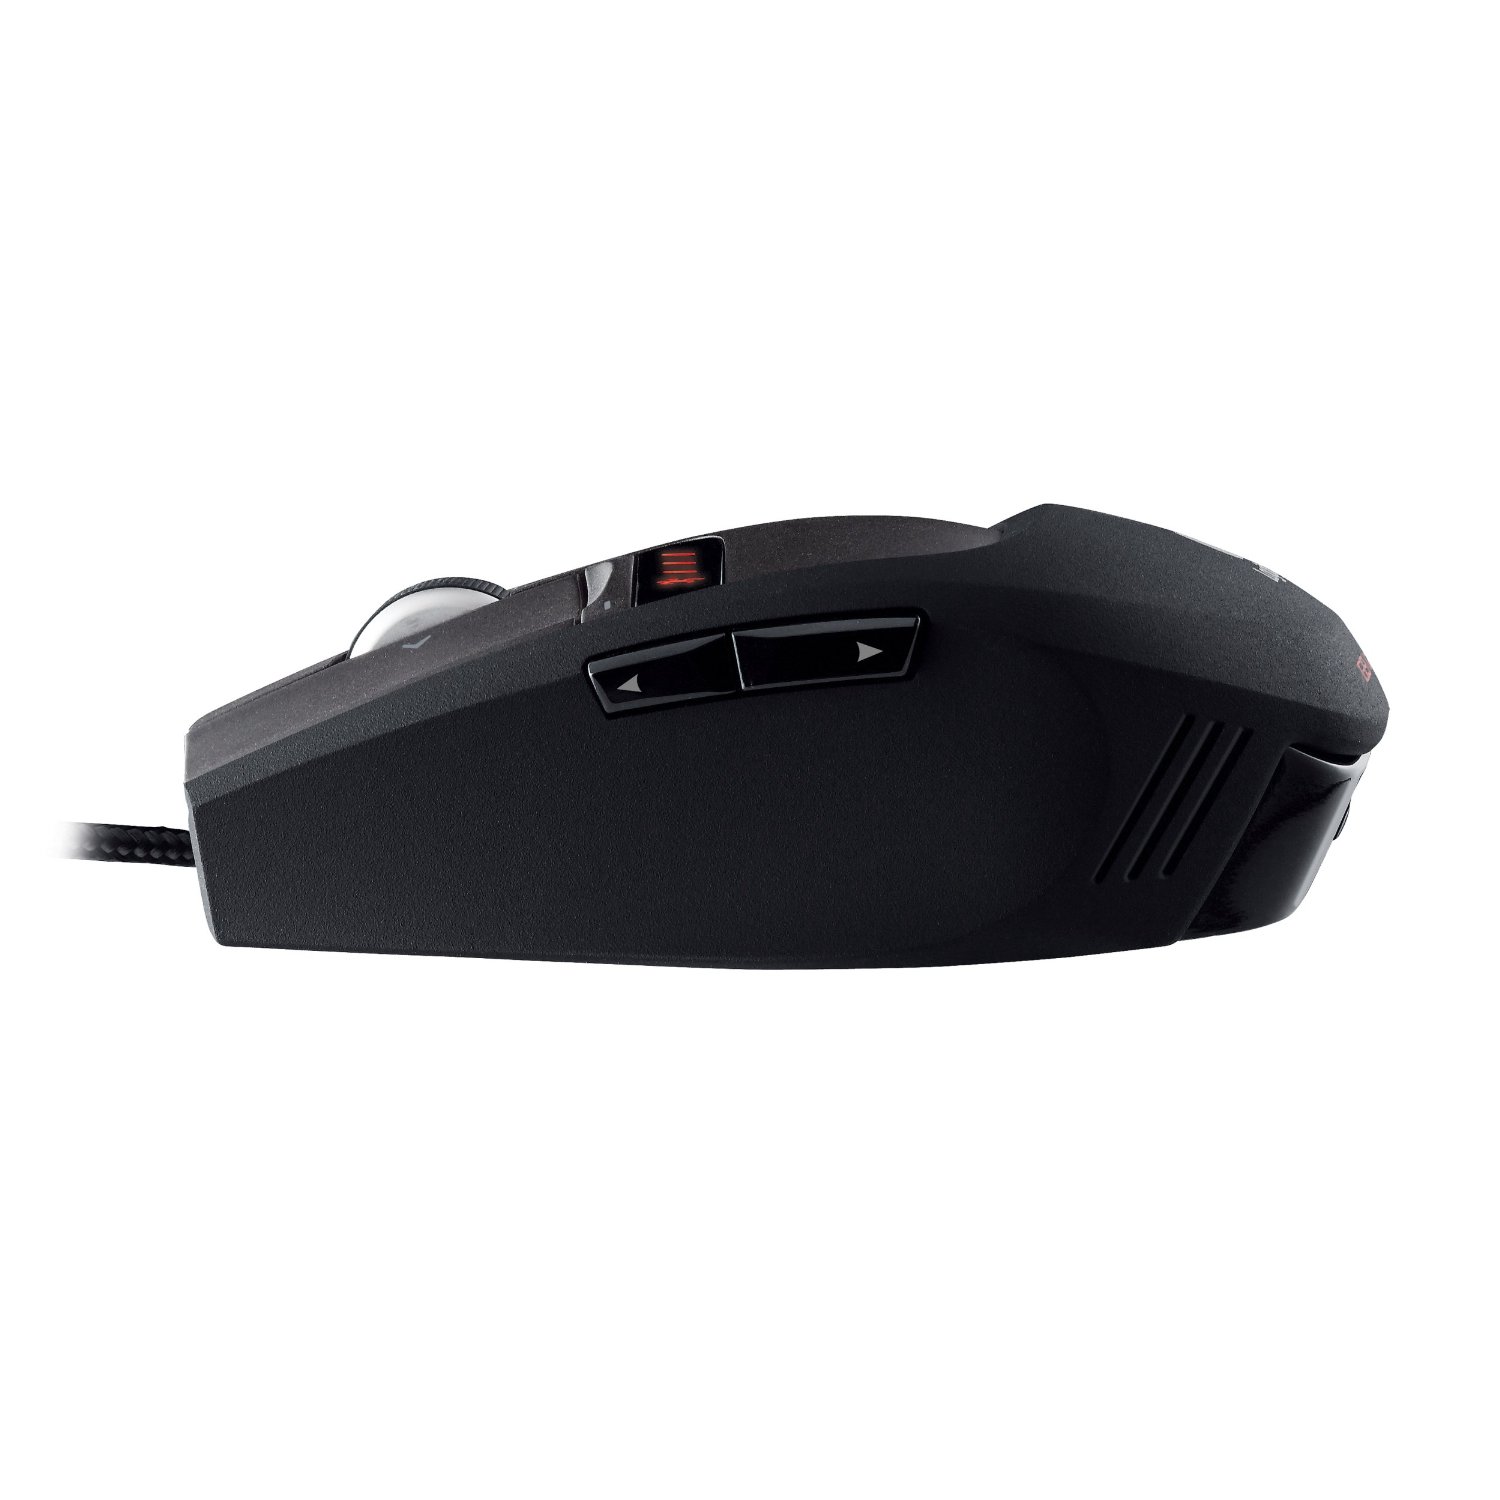 http://thetechjournal.com/wp-content/uploads/images/1111/1321182752-logitech-g9x-programmable-laser-gaming-mouse-11.jpg